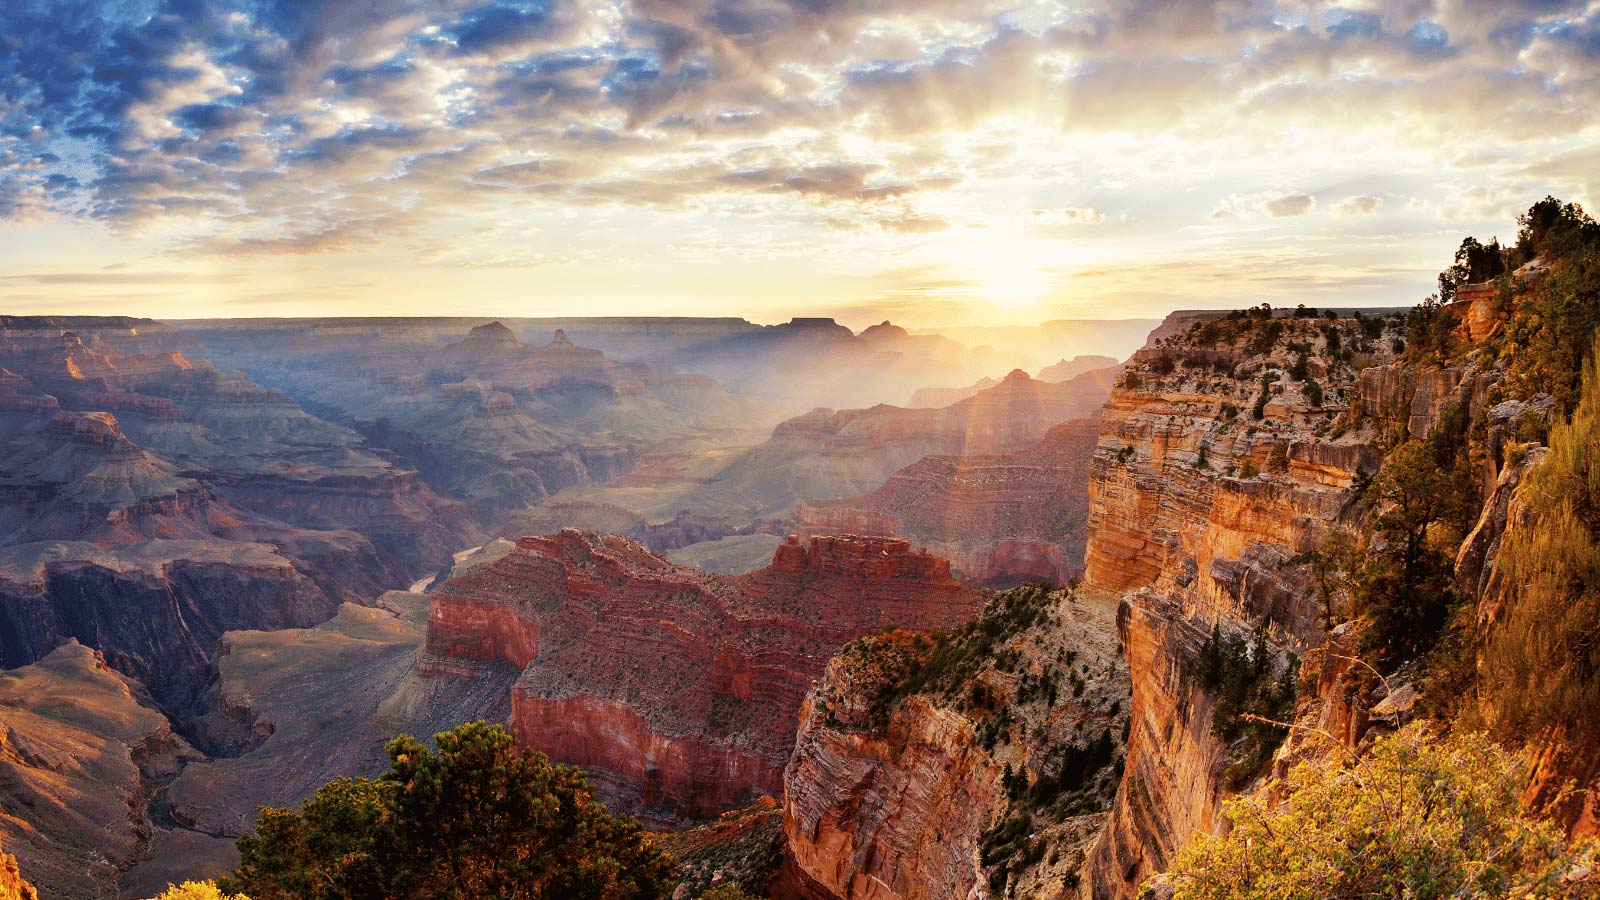 <p>The Grand Canyon is a majestic 277-mile-long canyon with the Colorado River flowing in the center of it. It’s a sight to behold and a must-see for anyone visiting the United States.</p>